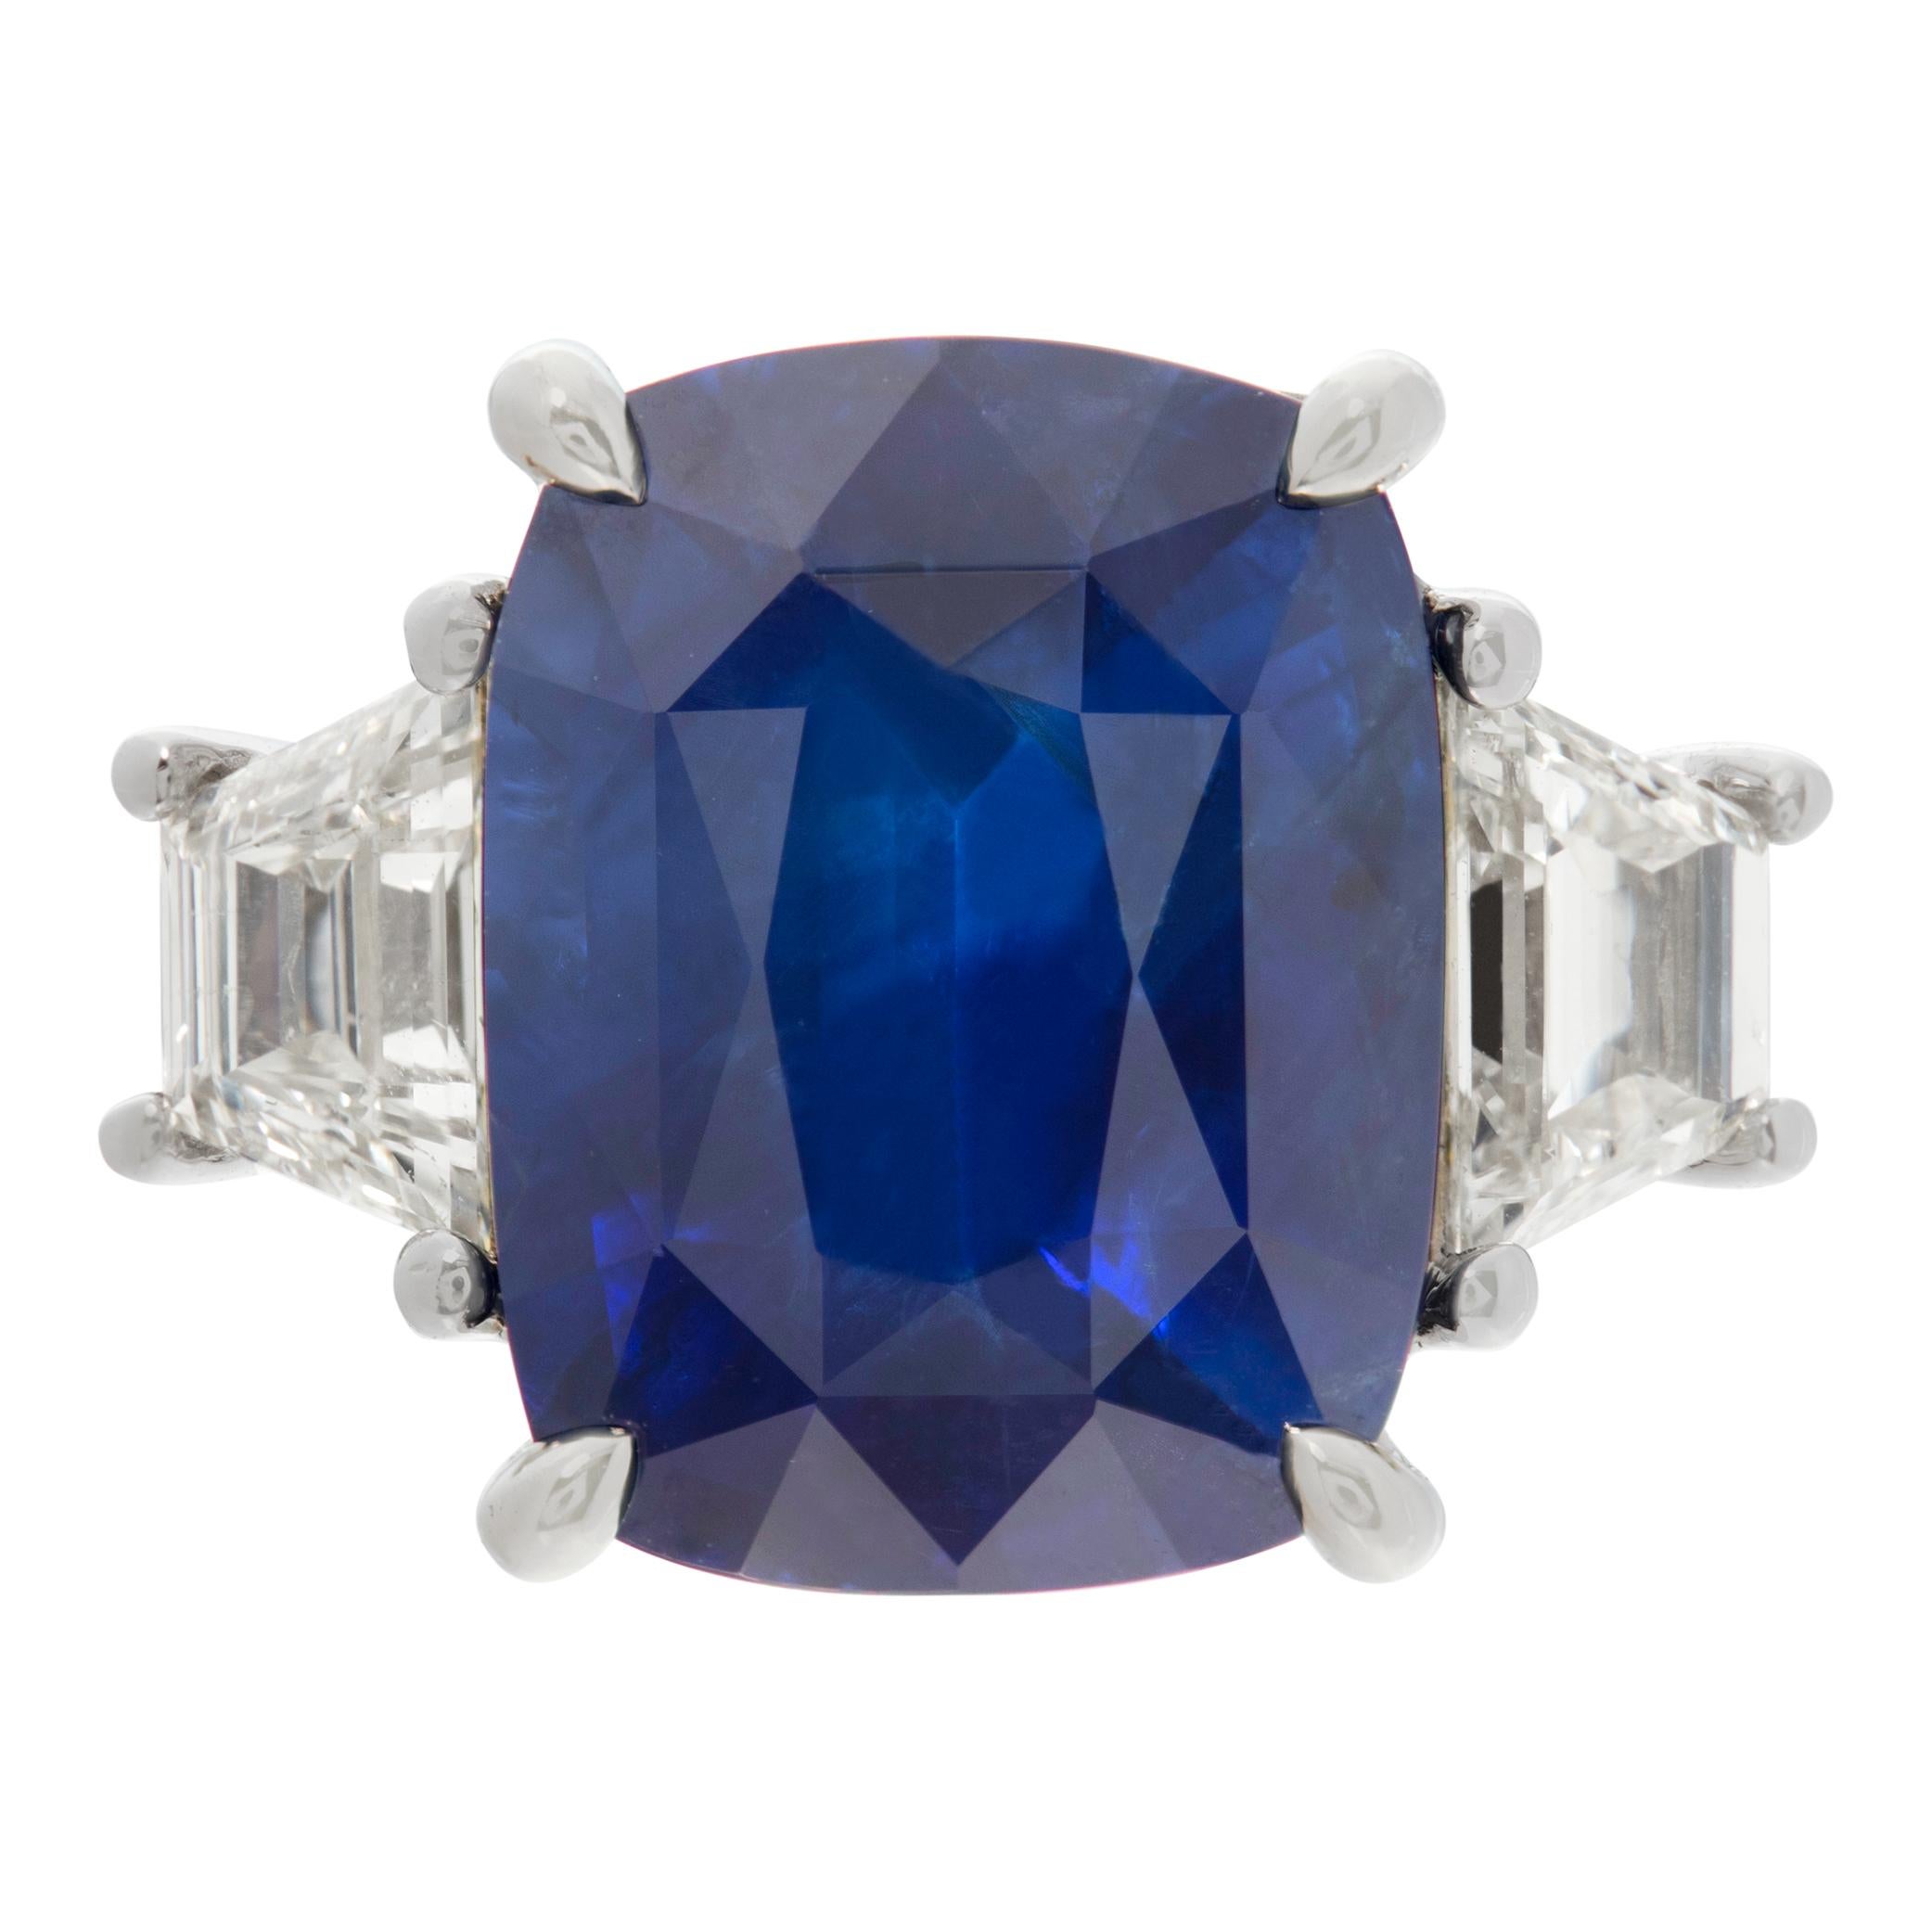 Cushion cut blue Sapphire & diamonds ring set in 18K white gold. Brilliant cushion cut sapphire: 5.47 carats, with 2 trapezoid cut diamonds, total approx. weight: 0.63 carat, estimate: G-H Color, VS Clarity. Size 6.75.This Diamond/Sapphires ring is